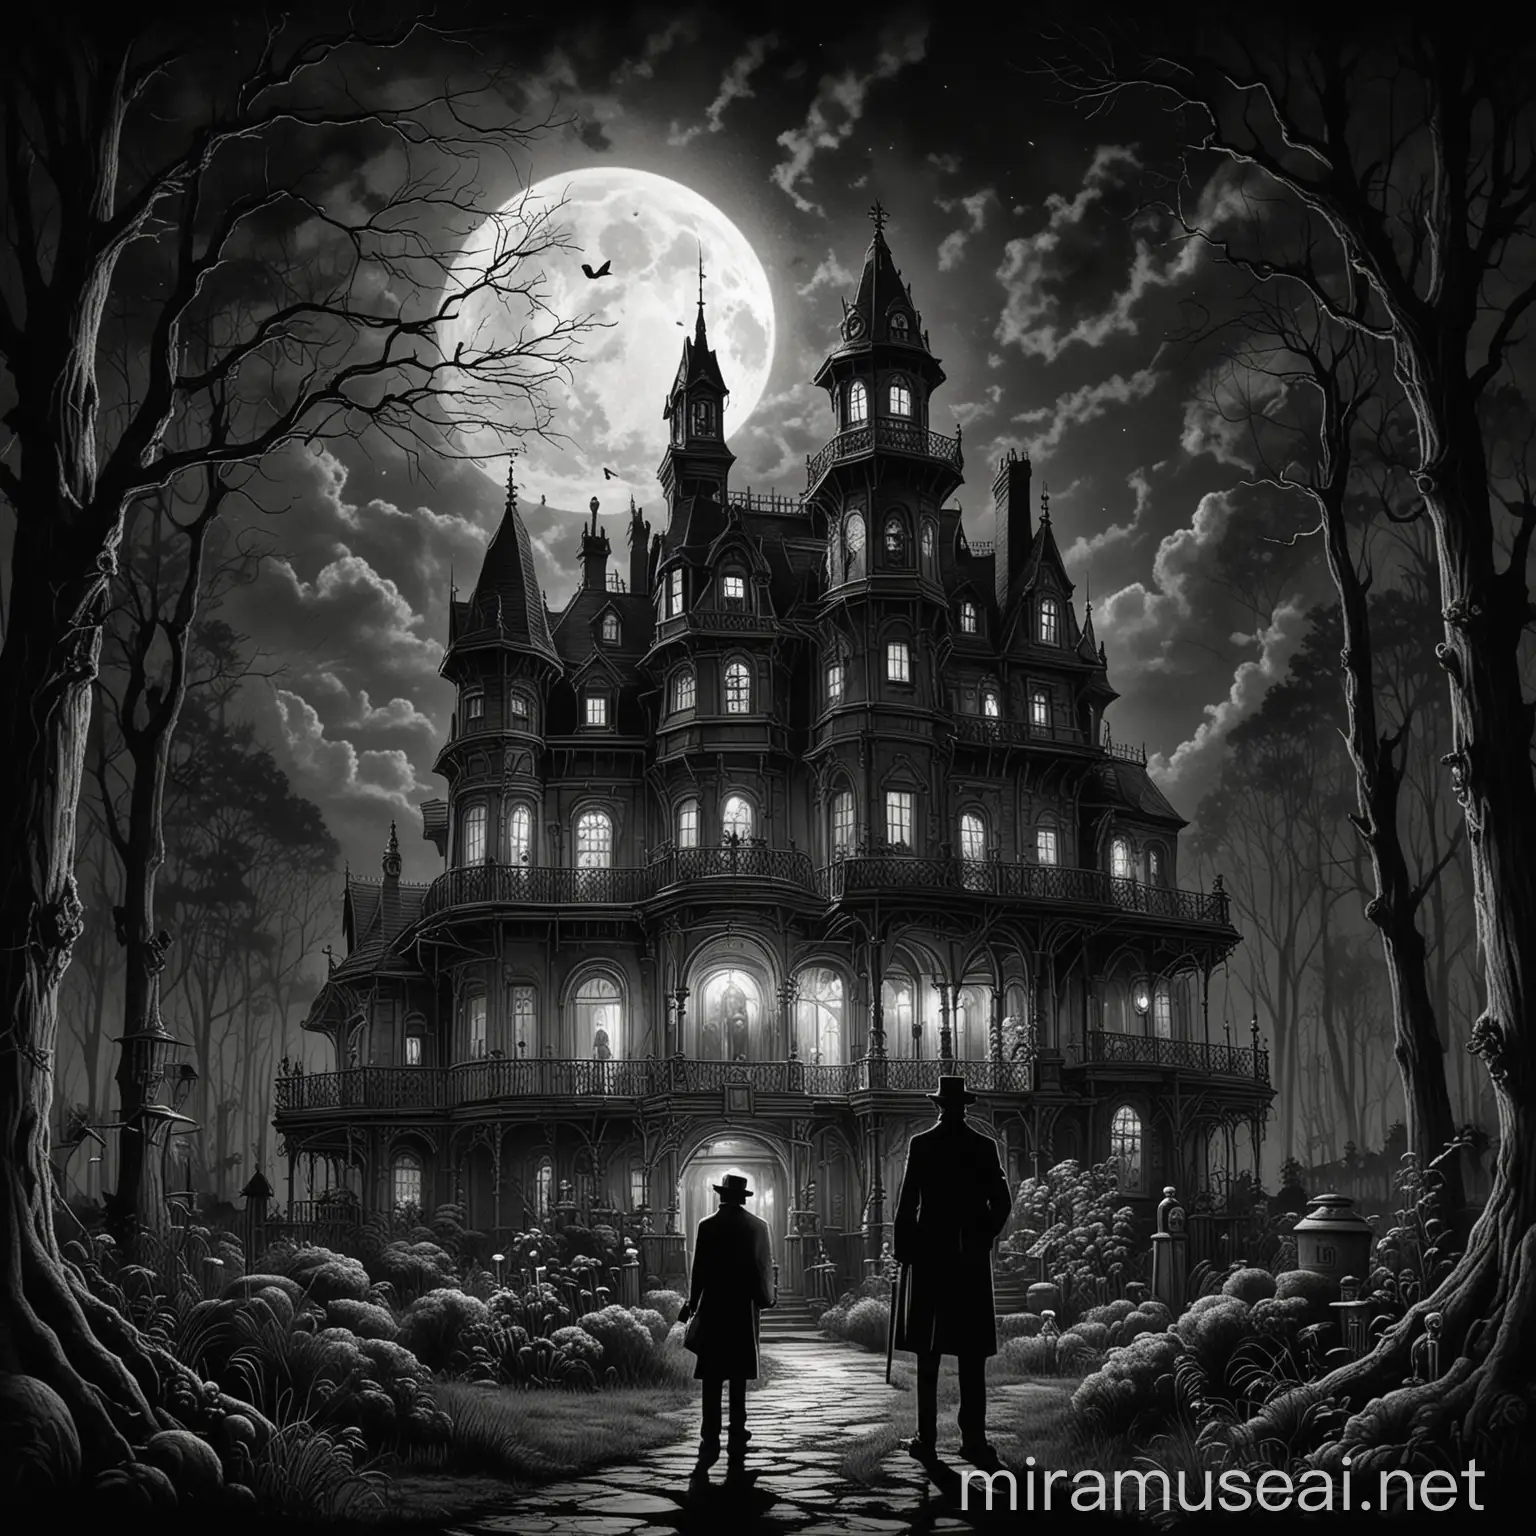 A Tim Burton-style drawing of a 1920's noir detective standing next to a giant Victorian boss house with many turrets and rooms in a shadowy forest with gardens, on a full moon night